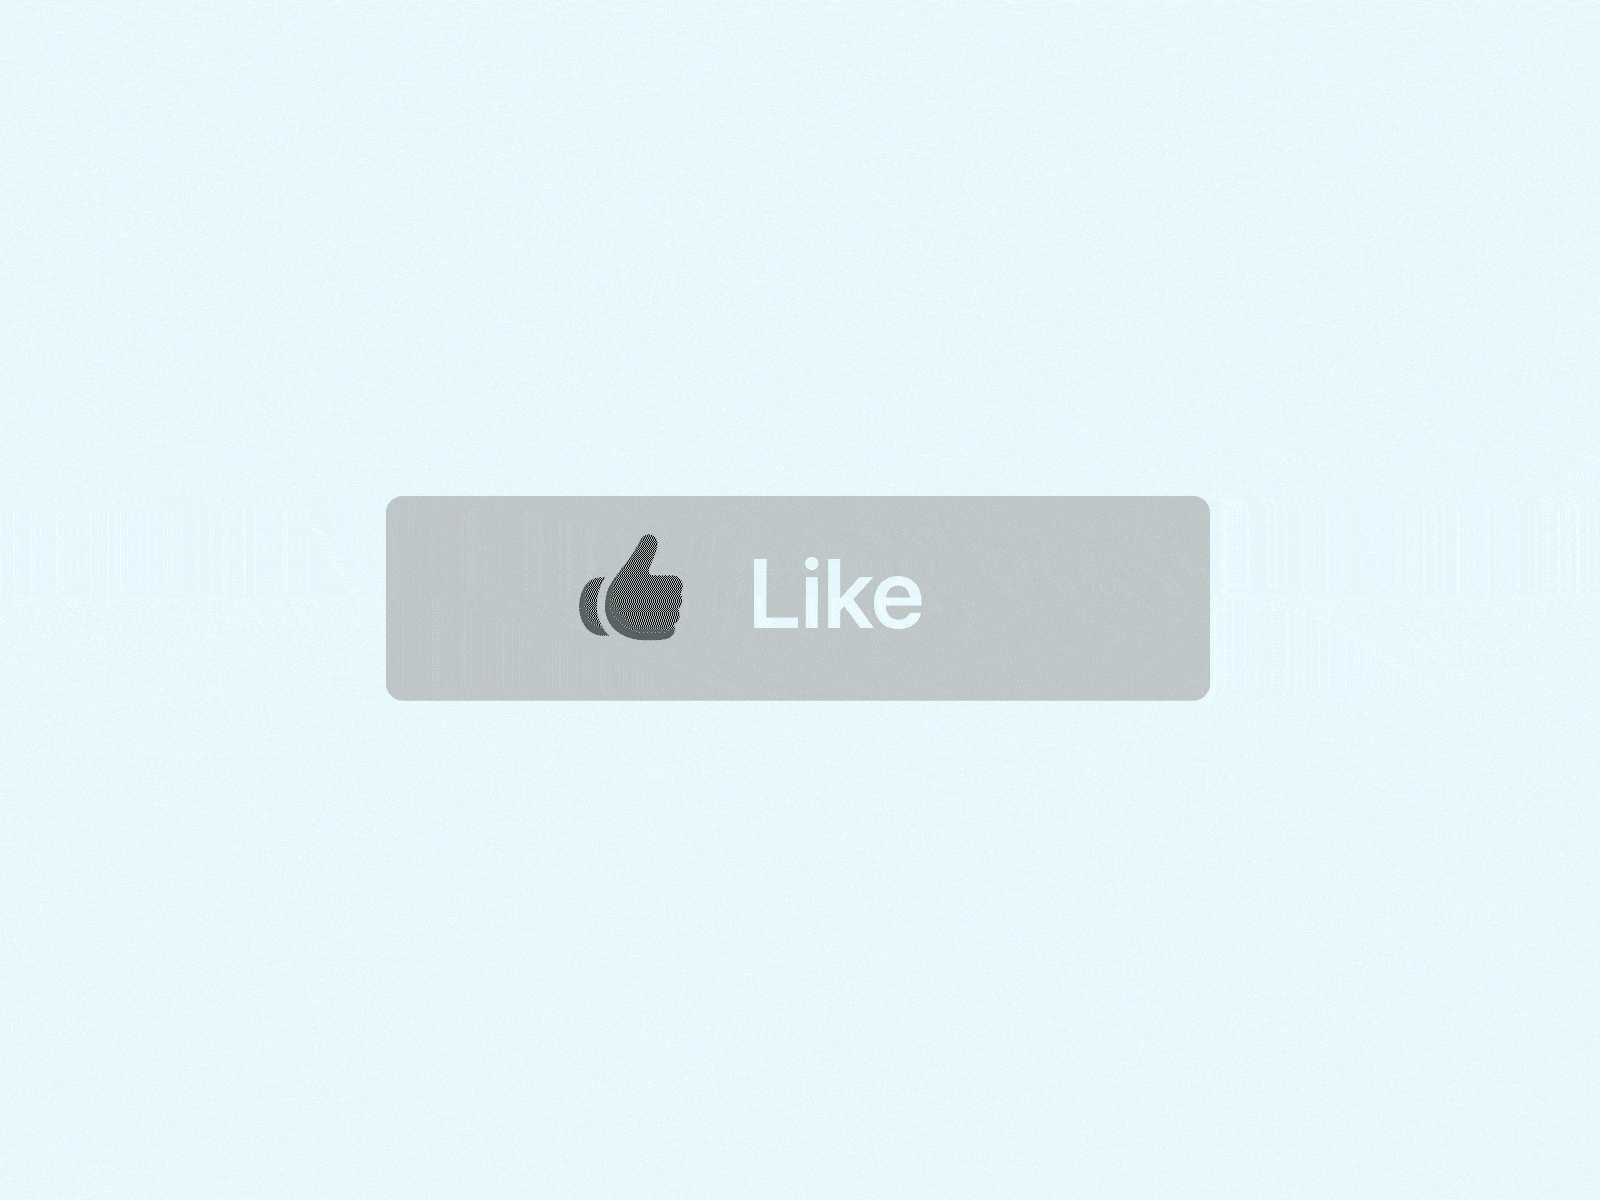 Like Button by Will Taoui on Dribbble